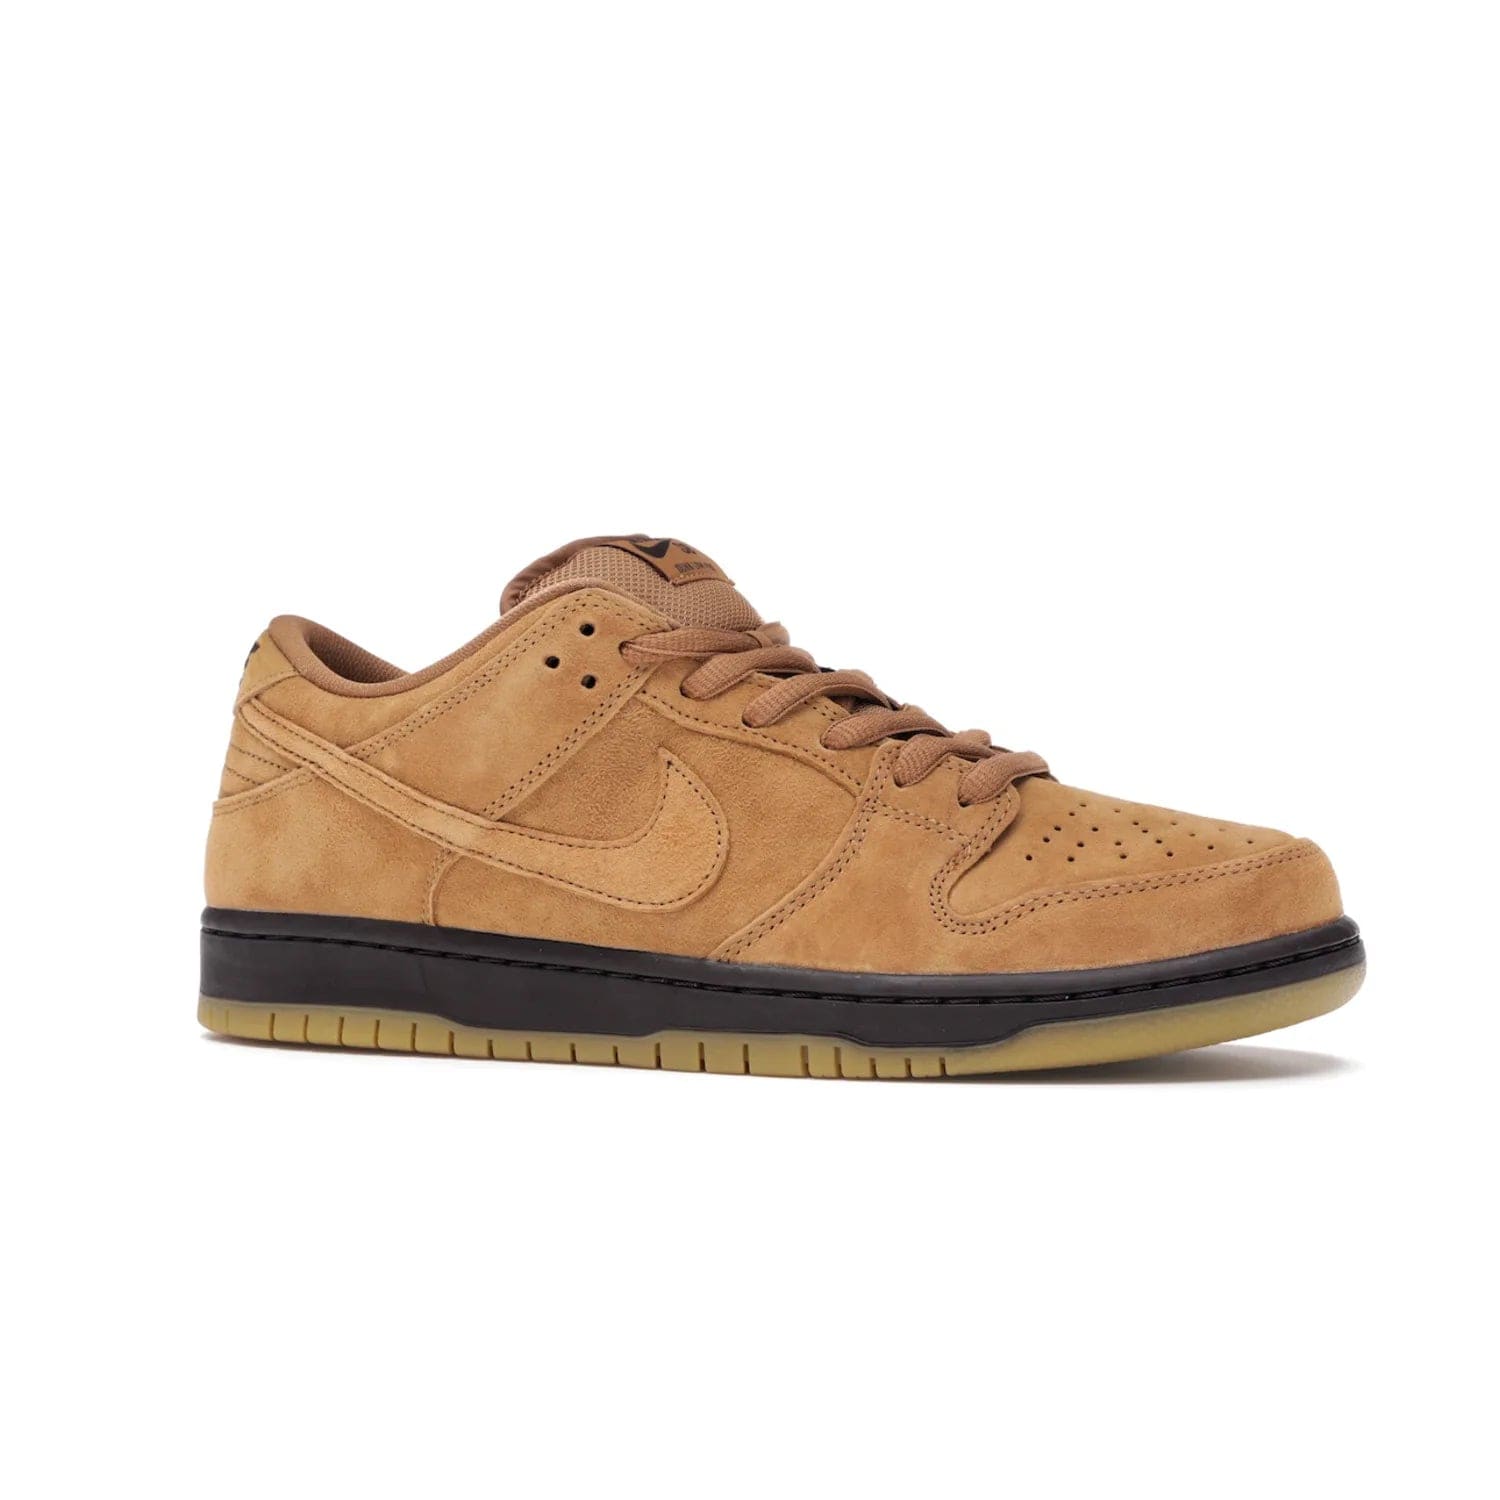 Nike SB Dunk Low Wheat (2021/2023) - Image 3 - Only at www.BallersClubKickz.com - The Nike SB Dunk Low Wheat (2021/2023)has a sleek silhouette and wheat suede upper. Tan tones for lining, mesh tongues, and laces. Iconic color palette midsole, perforated boxing toe. Brown branding on tongue and heel. Gum rubber outsole with partitioned pattern for traction. Eschewed in Feb 2021 for $110.